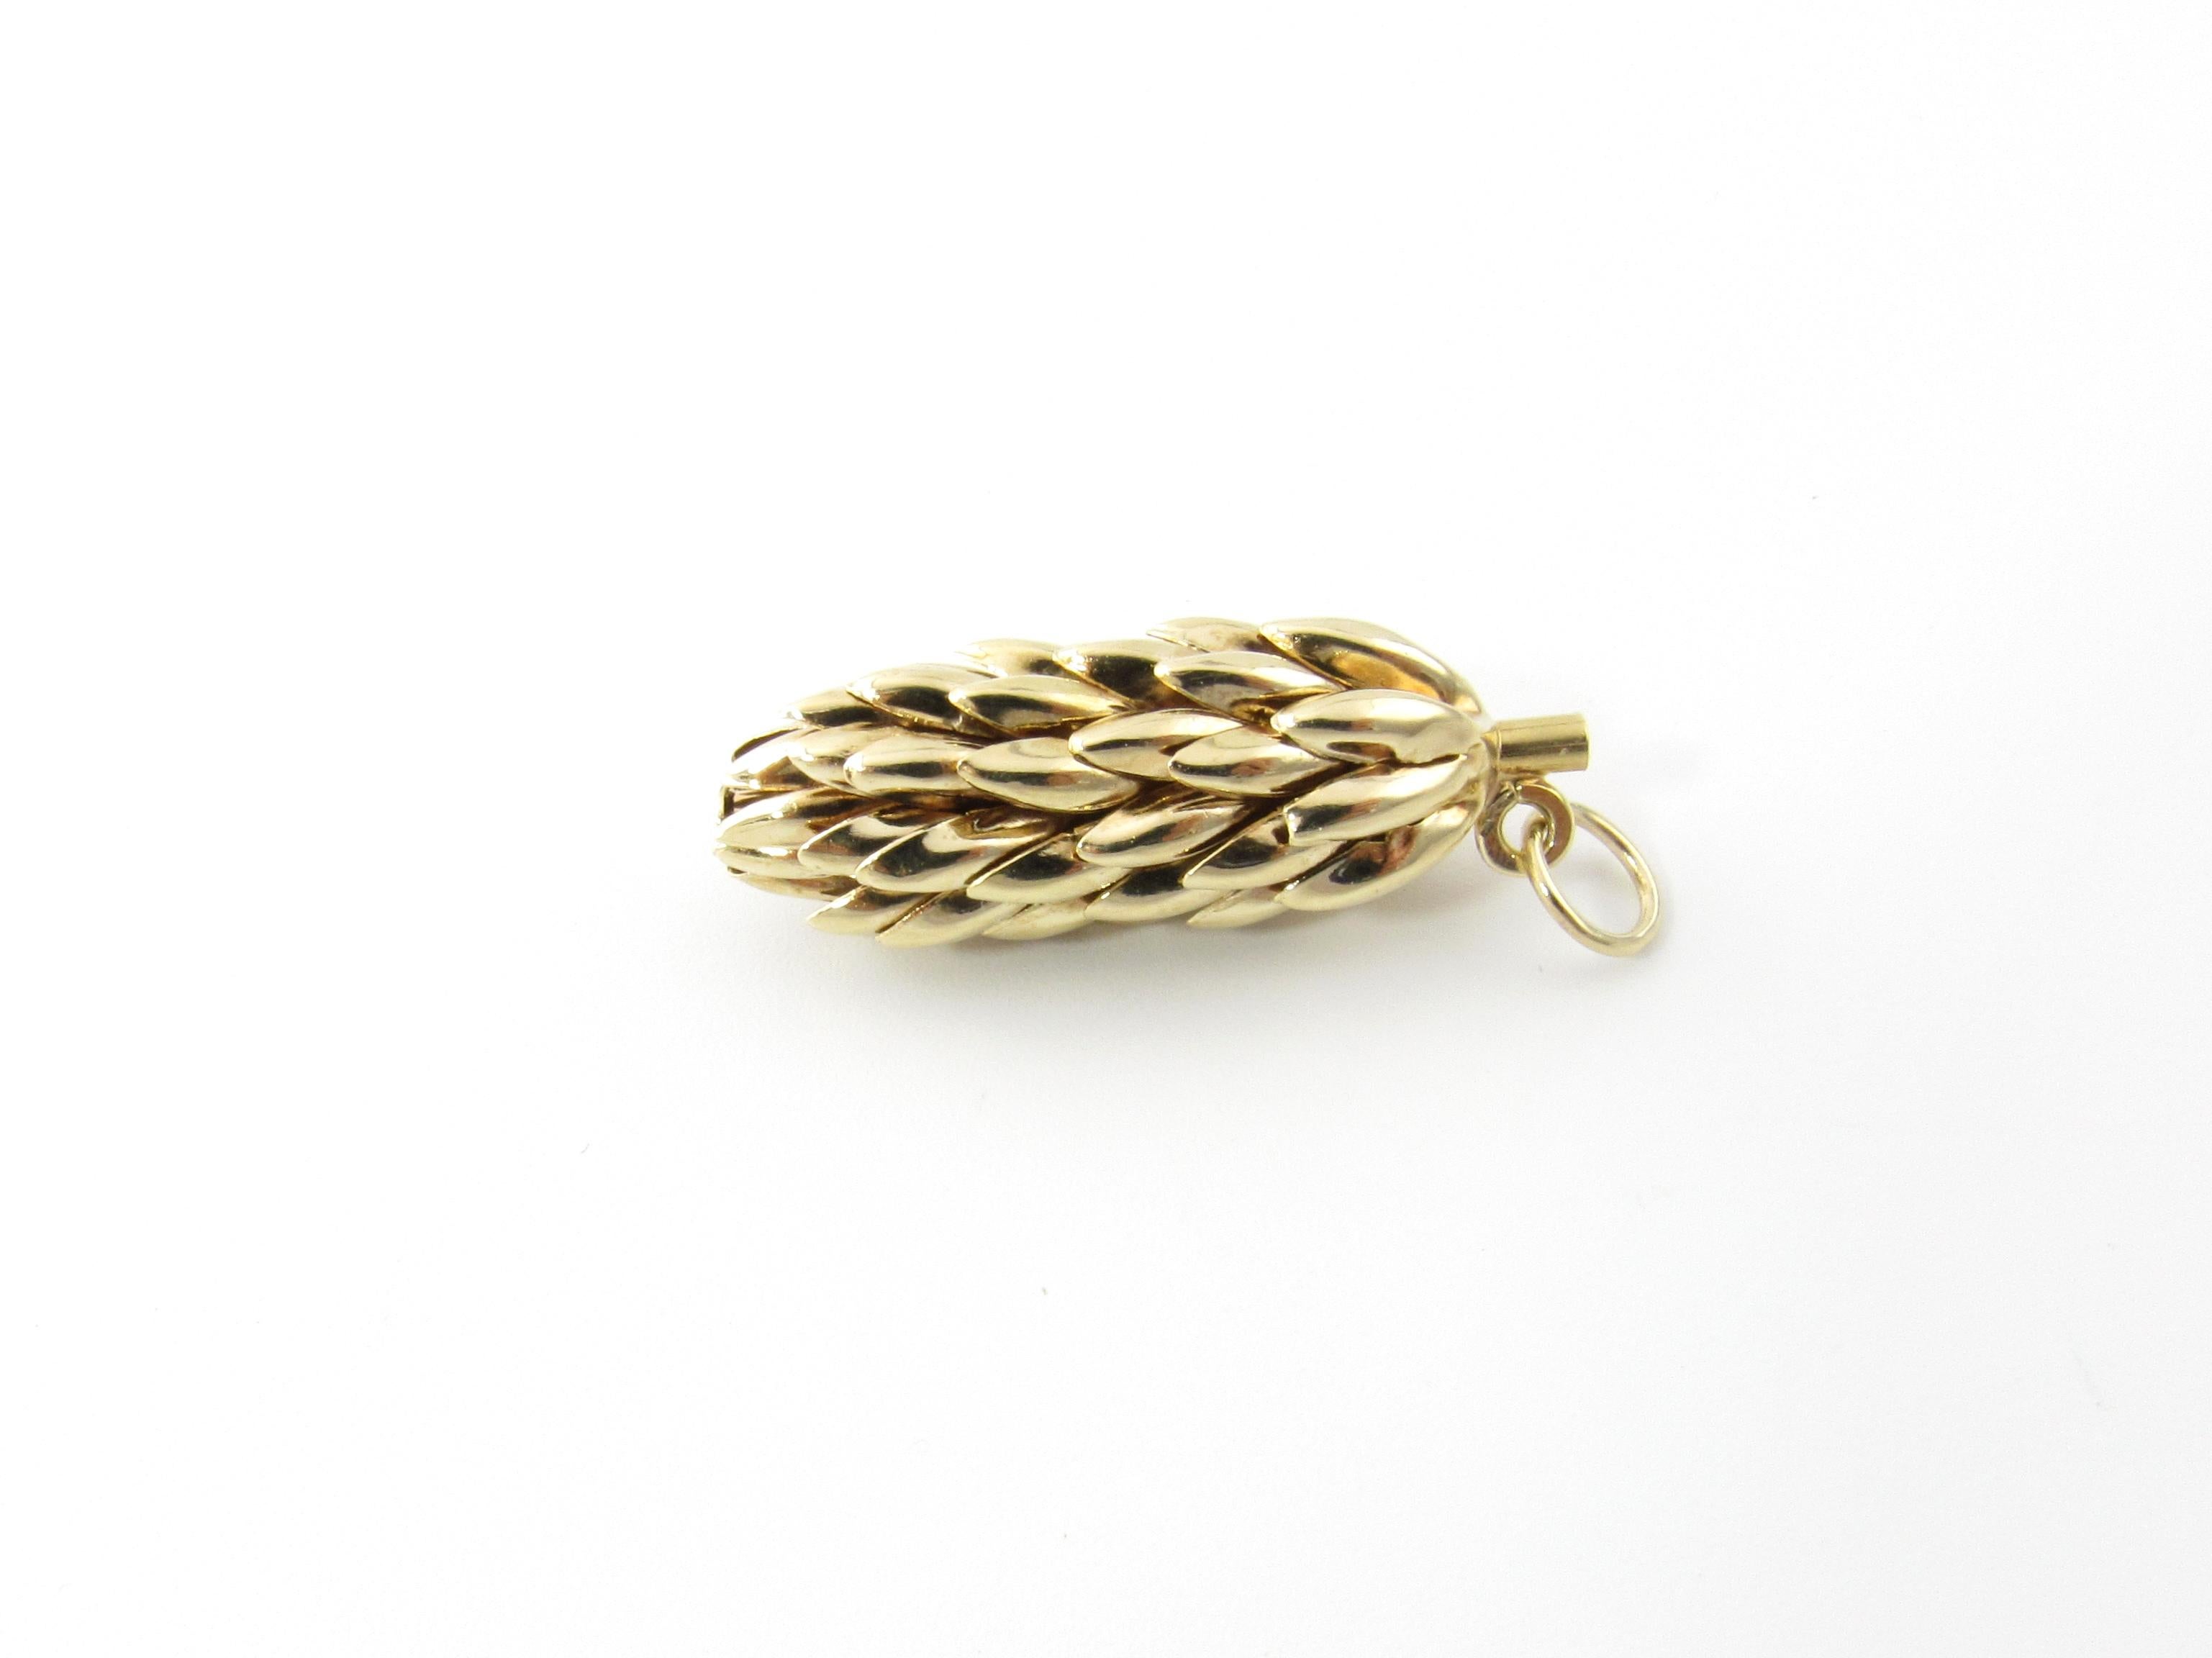 Vintage 14 Karat Yellow Gold Banana Bunch Charm

This whimsical 3D charm features a miniature banana bunch beautifully detailed in 14K yellow gold.

Size: 30 mm x 11 mm (actual charm)

Weight: 2.8 dwt. / 4.4 gr.

Stamped: ITALY 14K

Very good